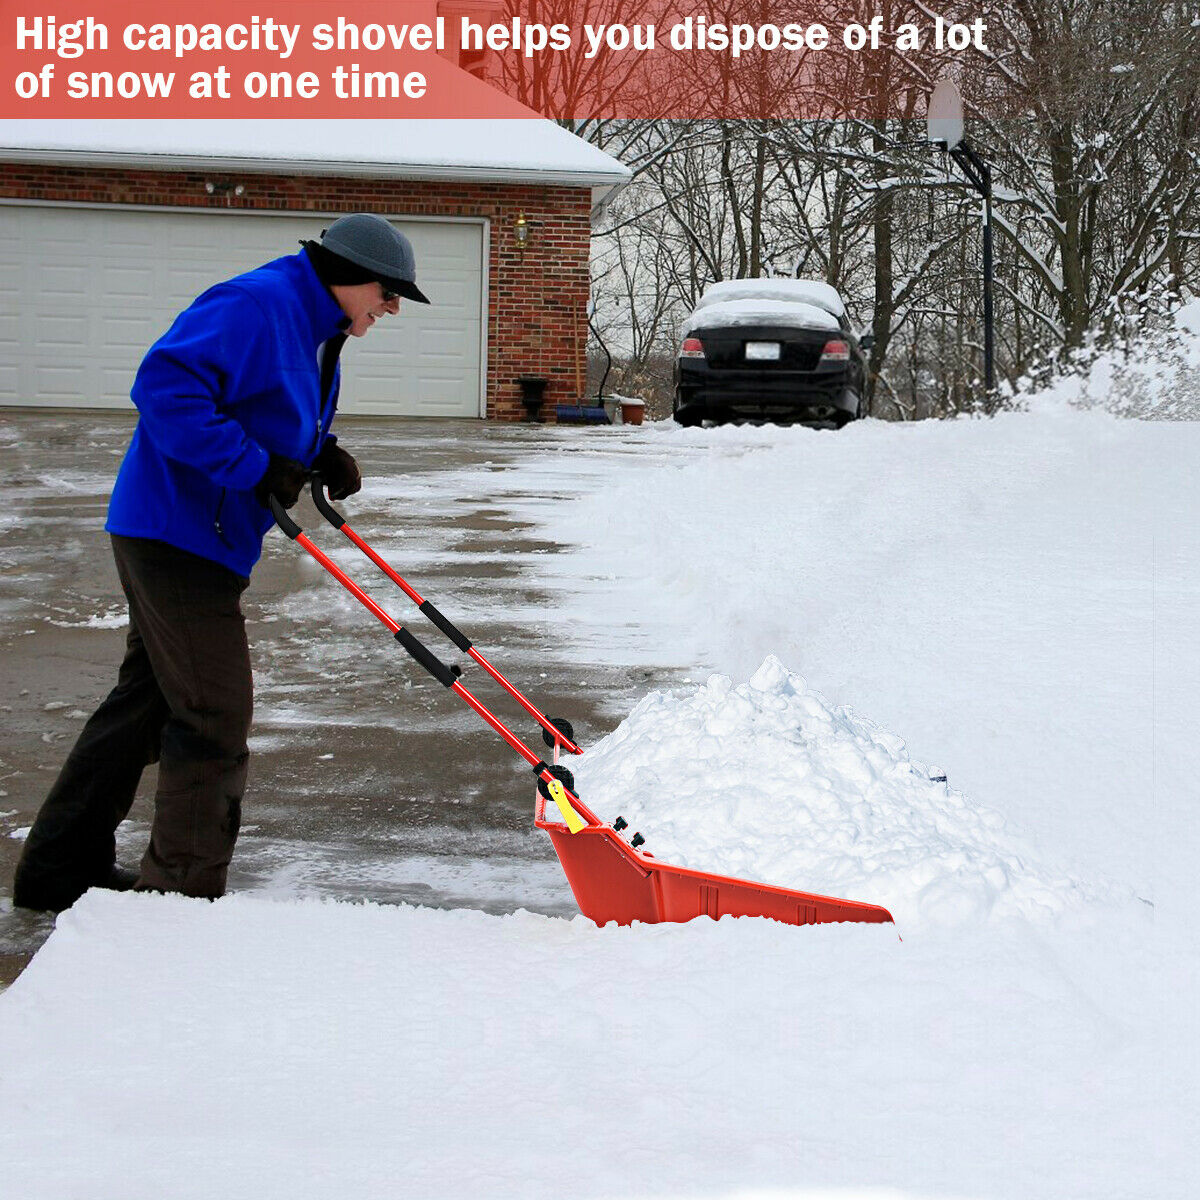 Gymax Folding Snow Pusher Scoop Shovel w/ Wheels Snow Removal Tool - image 5 of 10